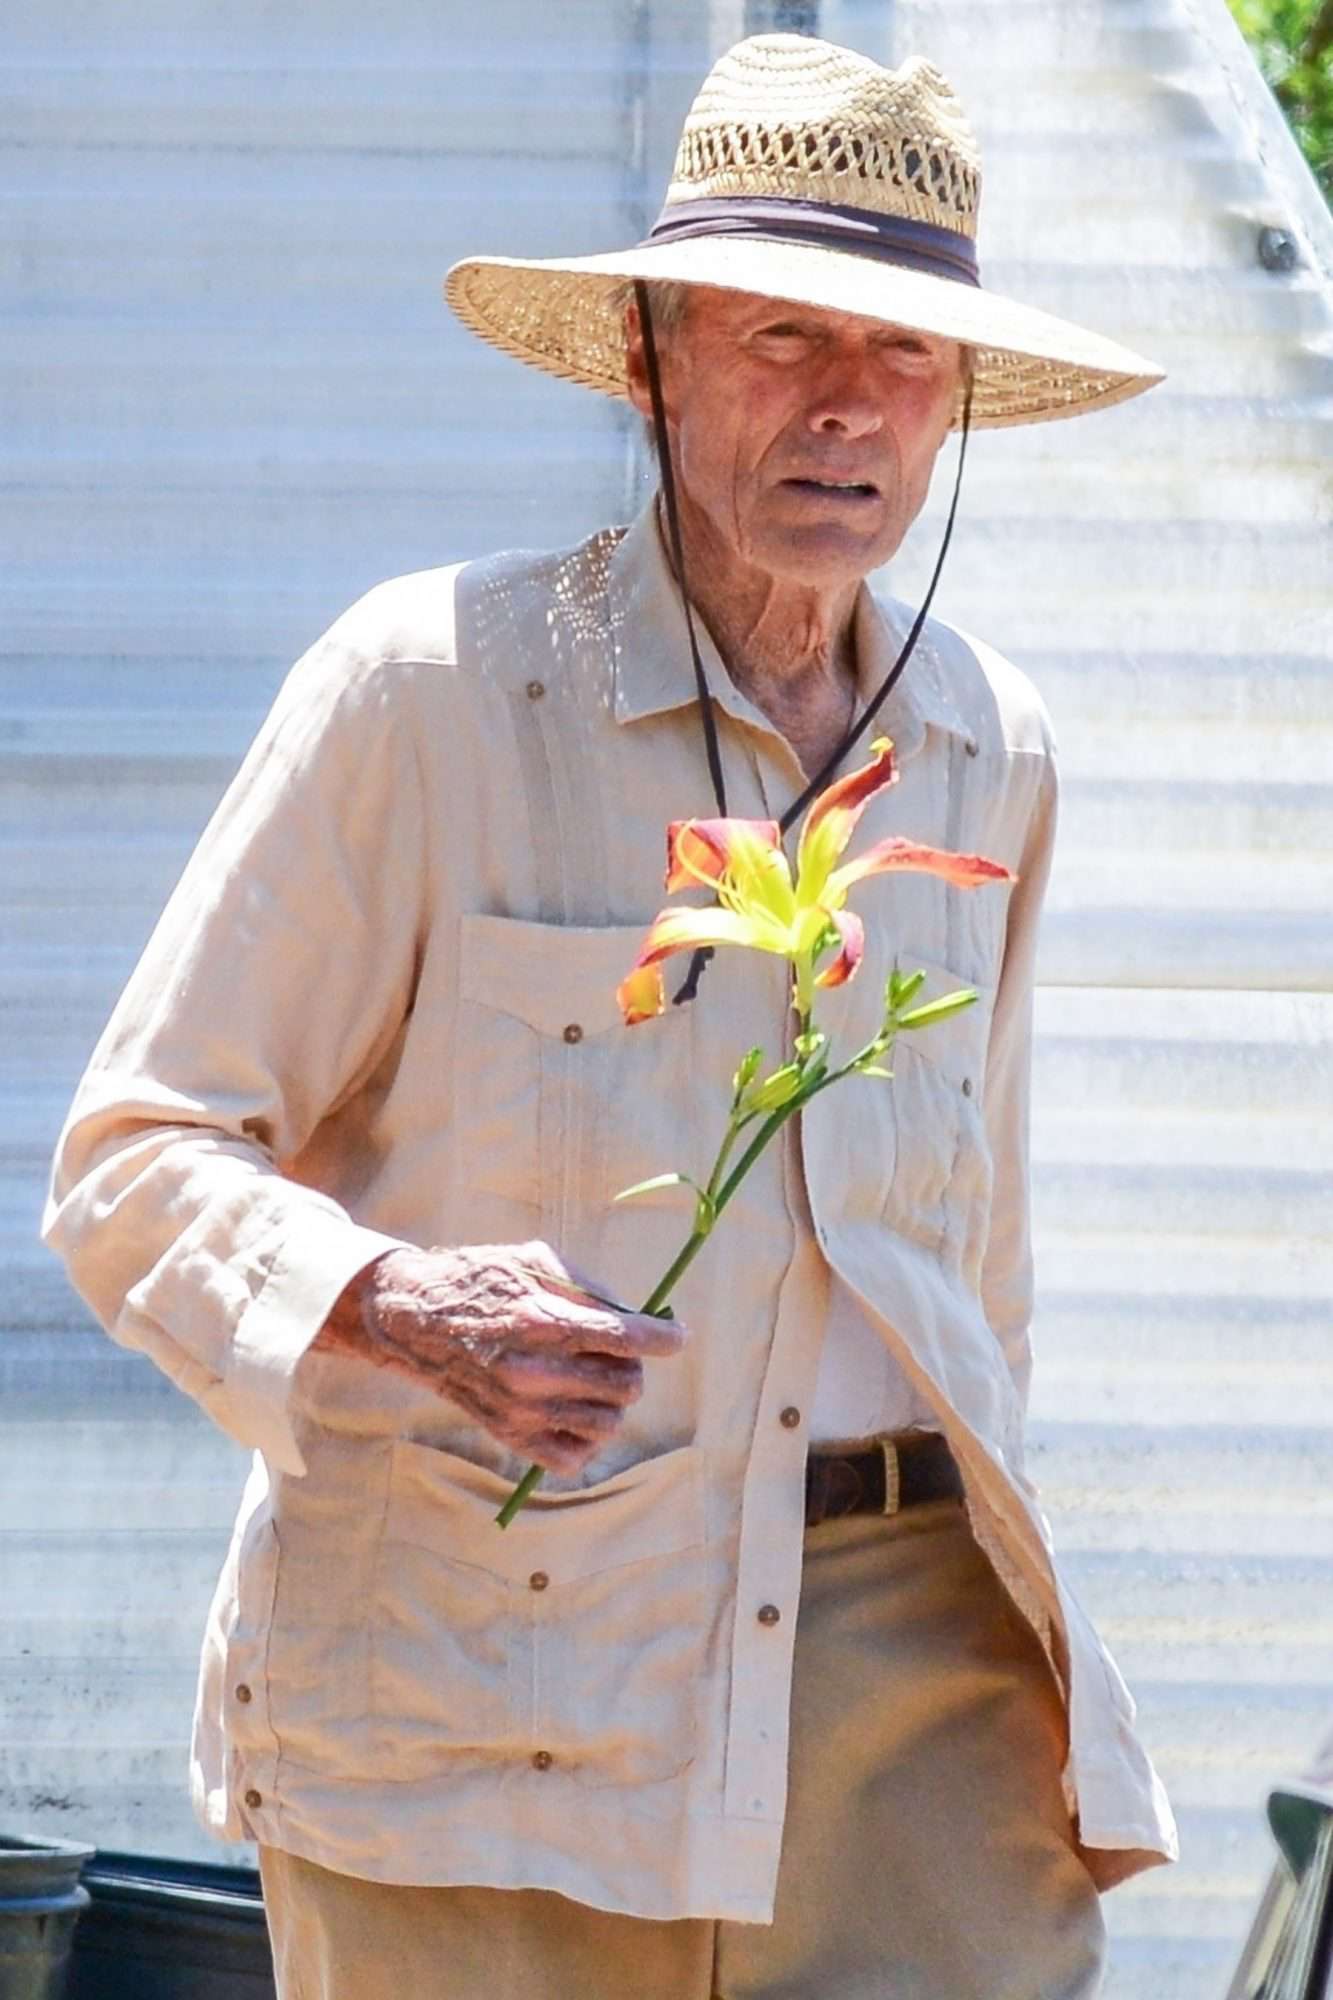 *EXCLUSIVE* Clint Eastwood is back to acting after a 6 year hiatus!